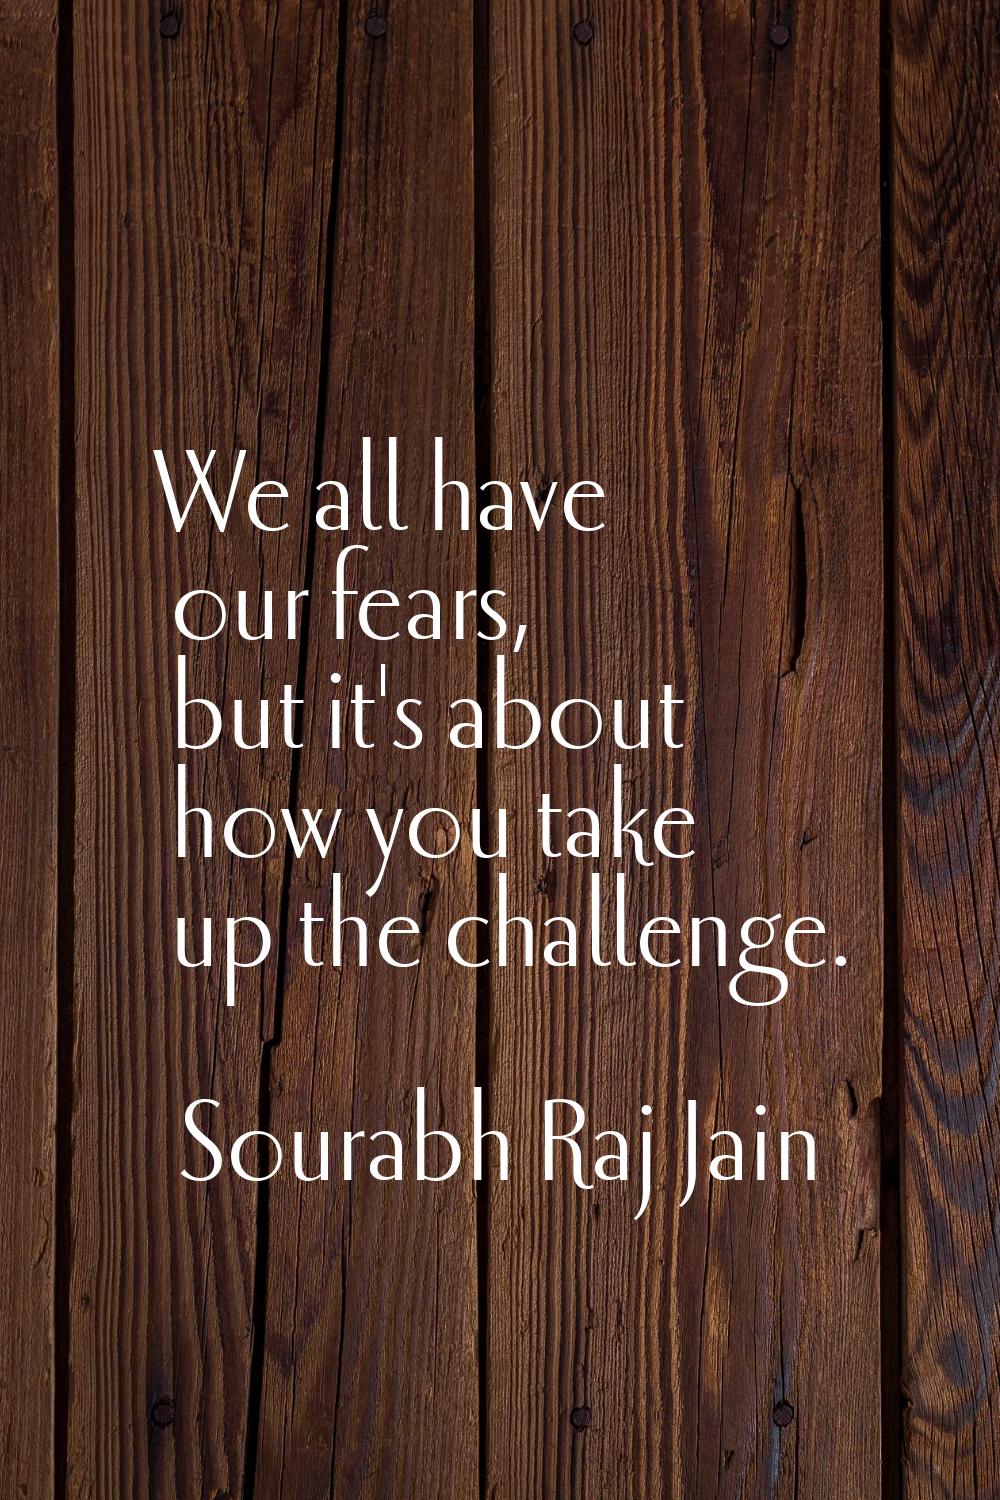 We all have our fears, but it's about how you take up the challenge.